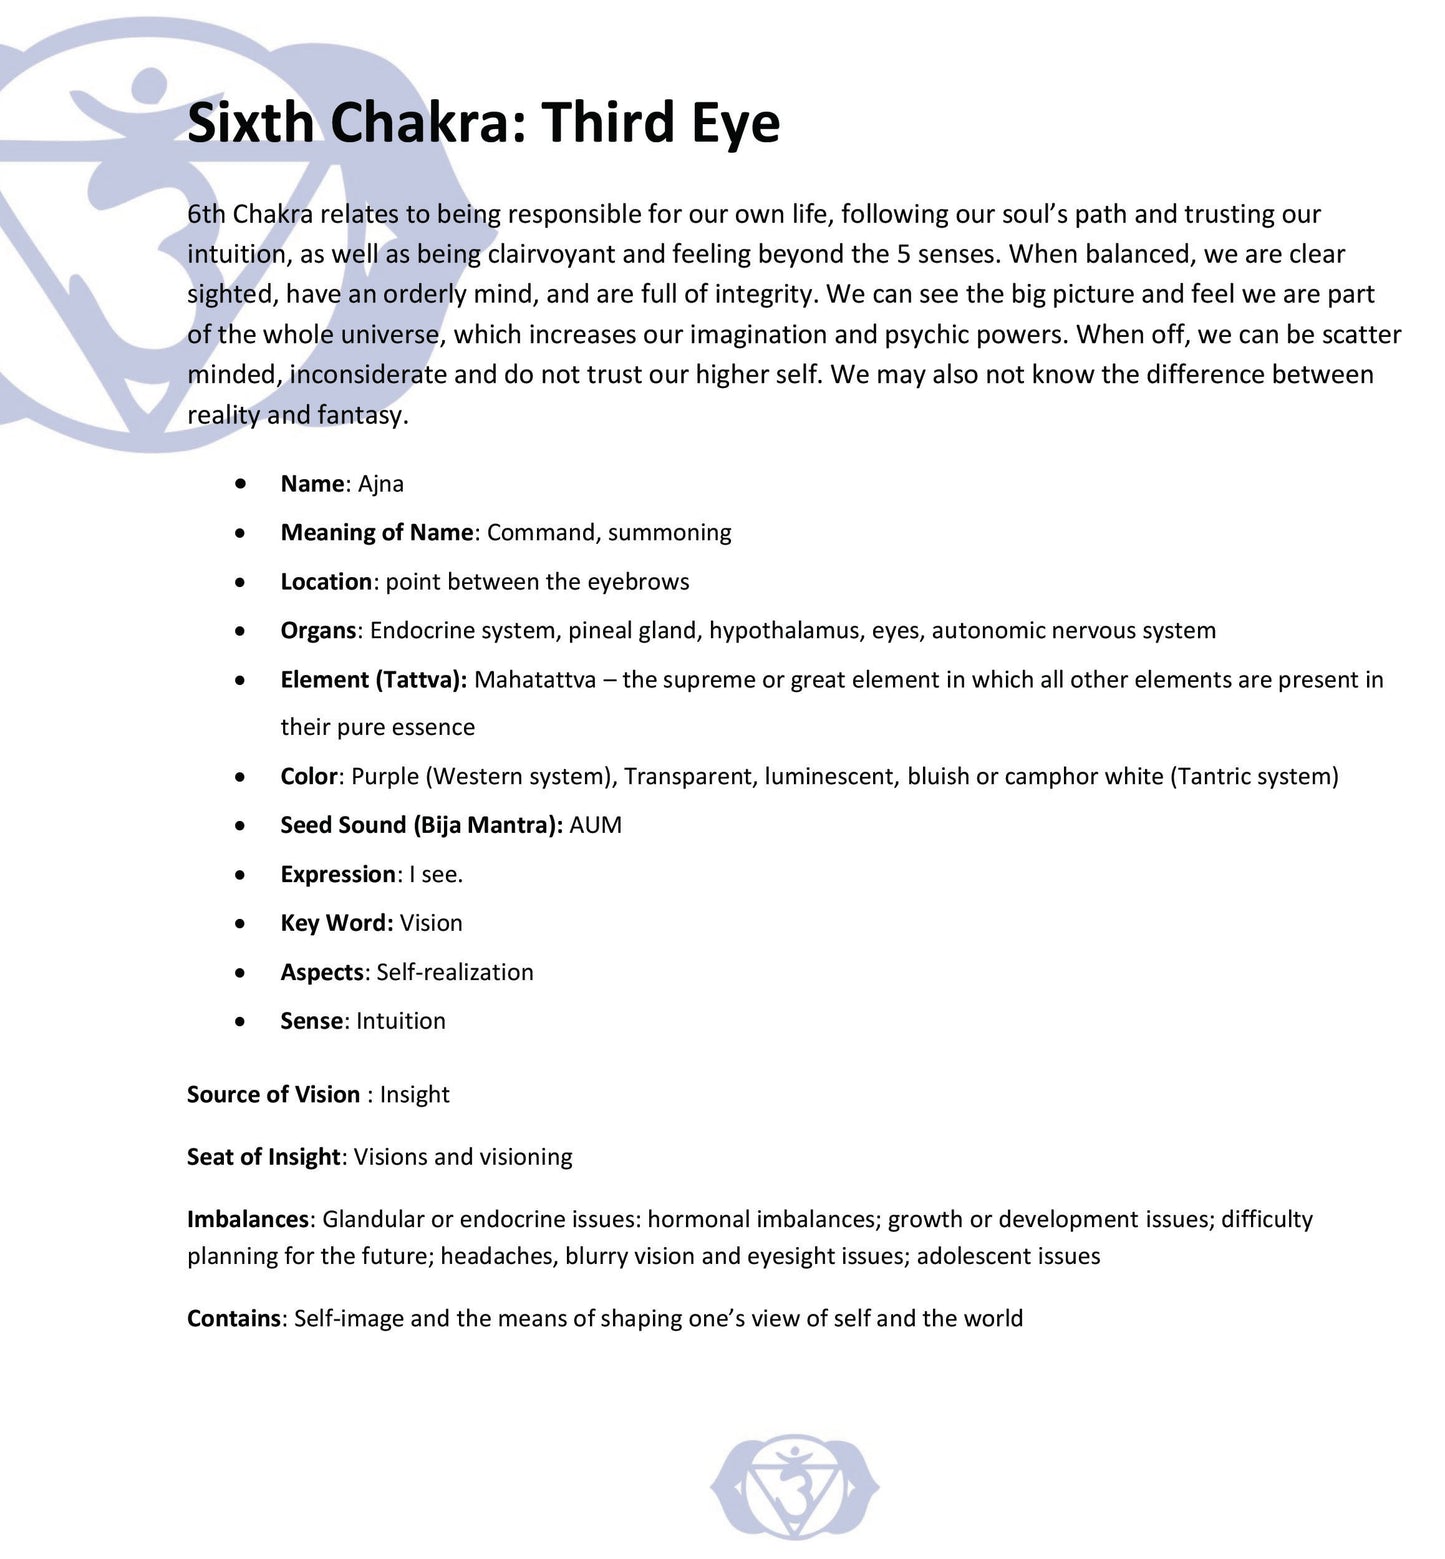 Reading Chakras with a Pendulum - Self-guided Workshop - Ebook